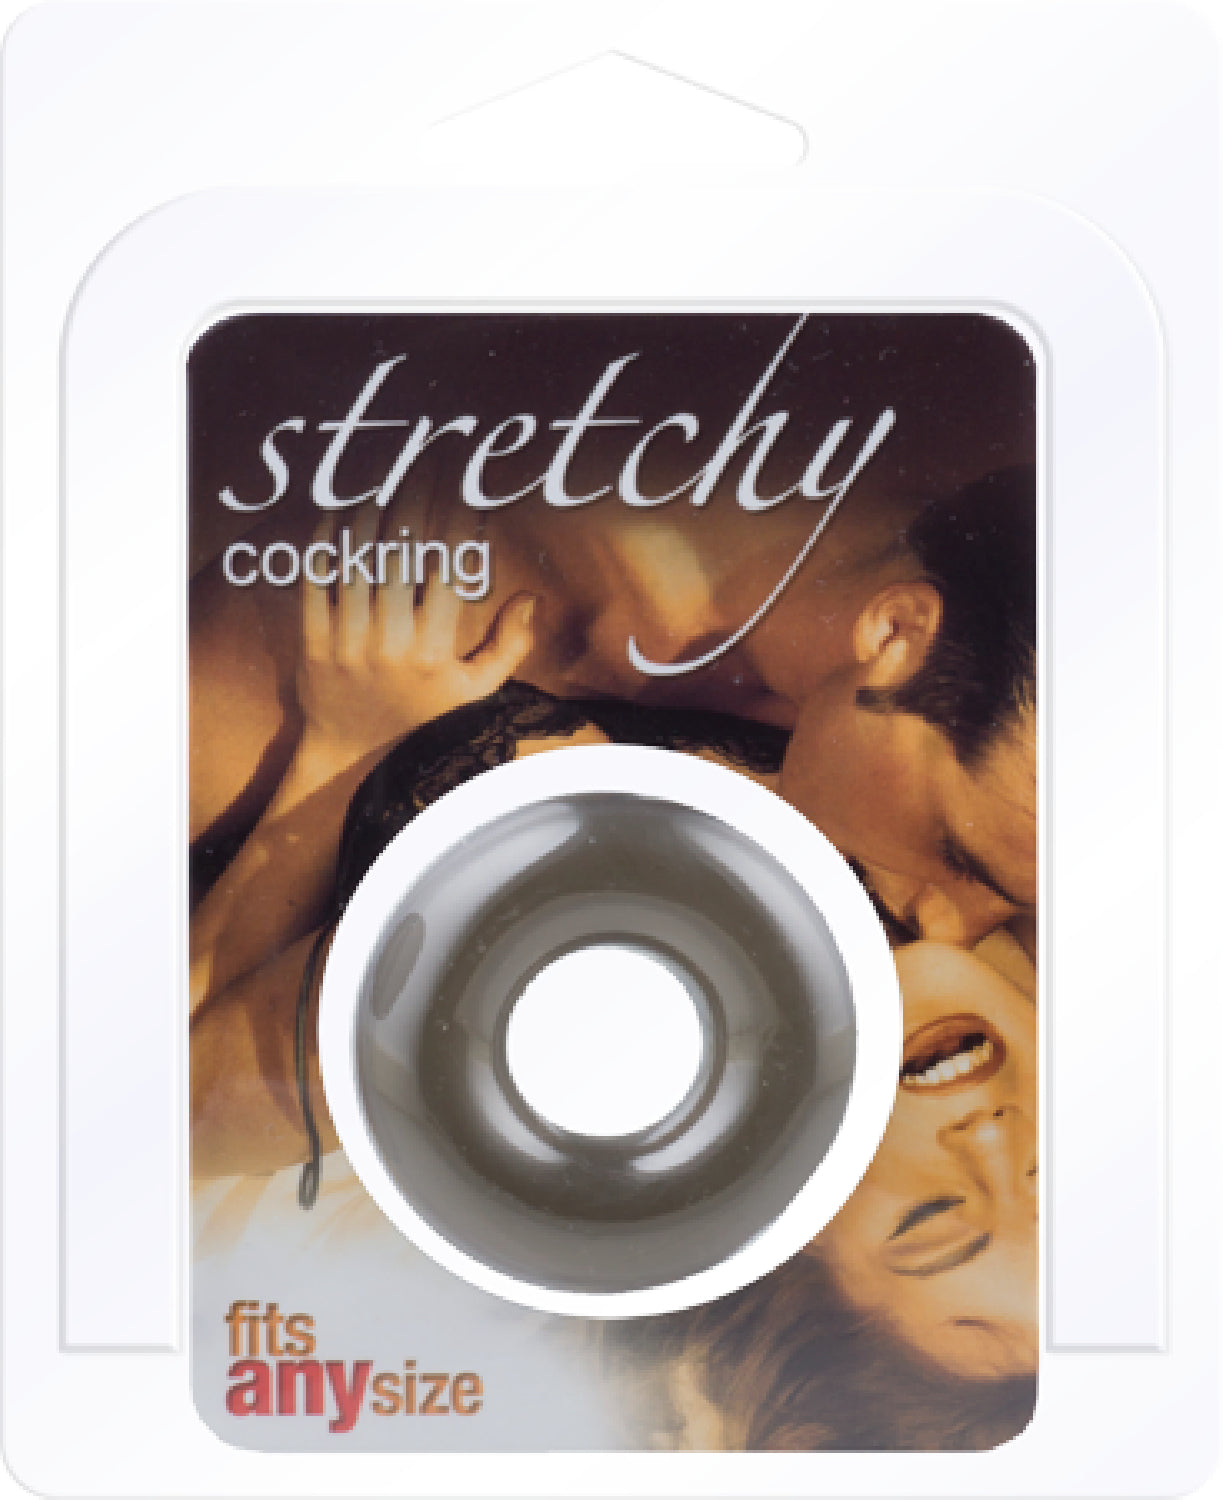 Stretchy Penis Cock Ring- Smoke Donut-Shaped Cock Ring - Early2bed